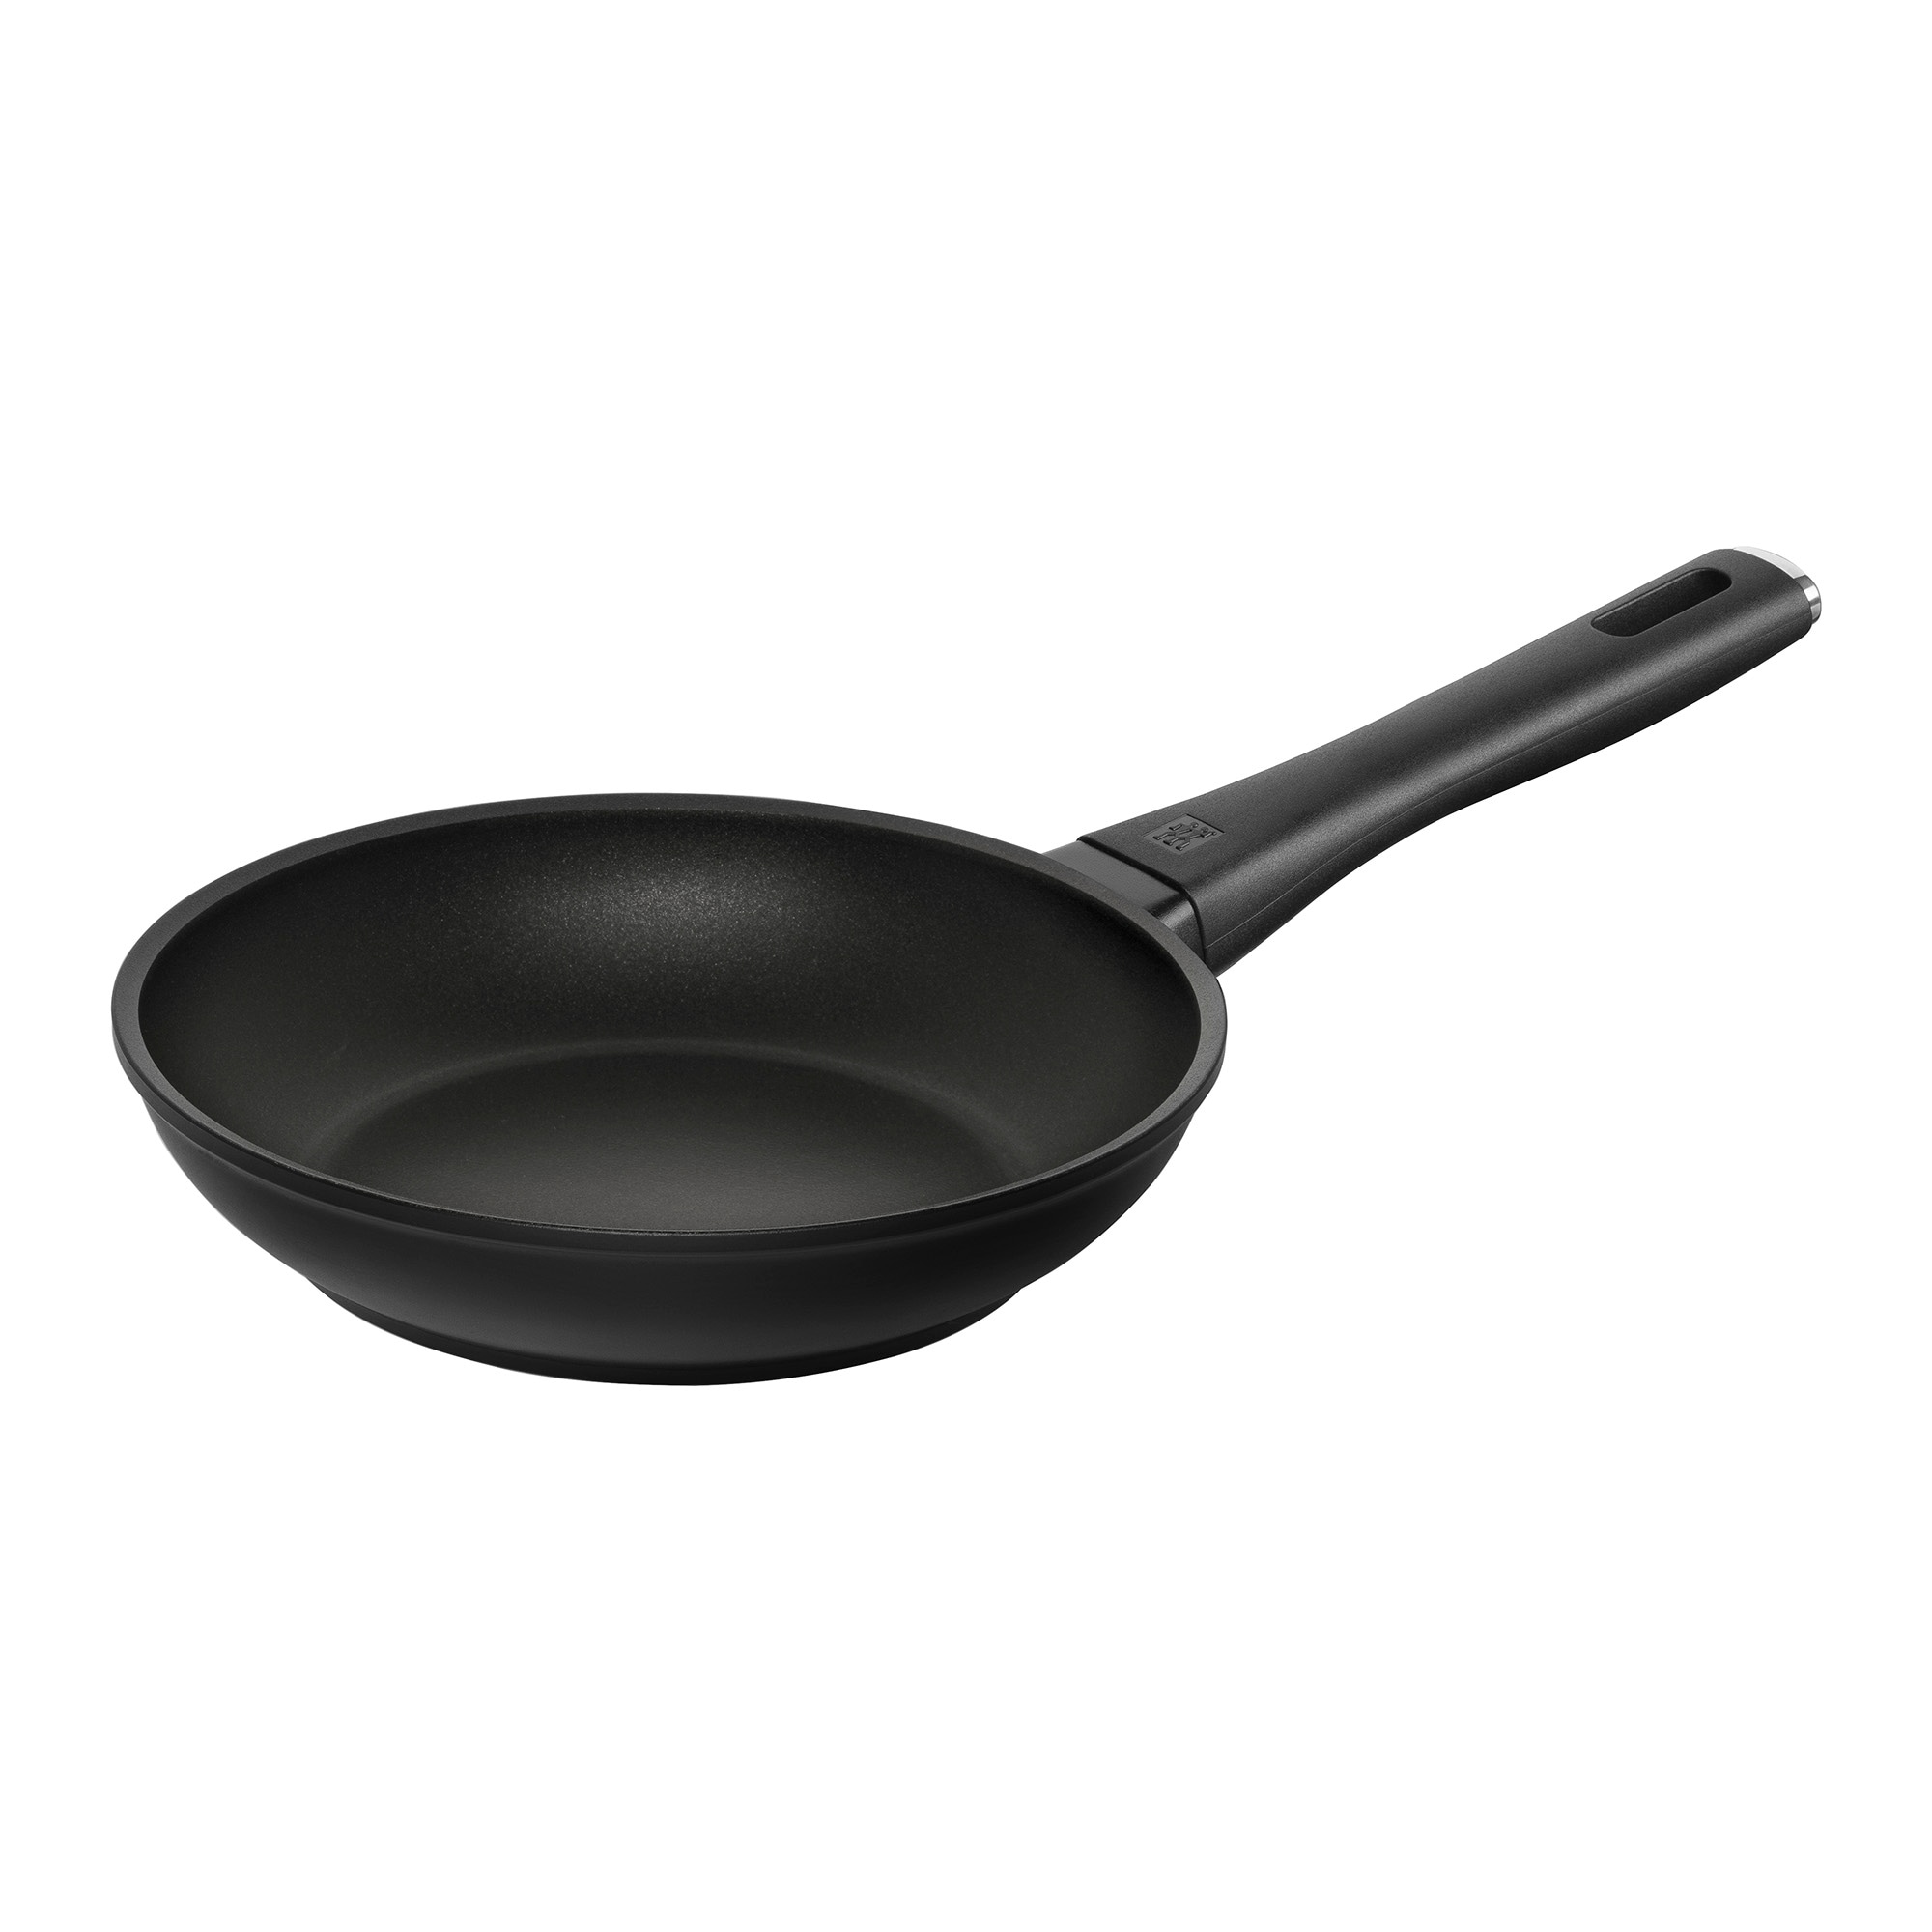 https://ak1.ostkcdn.com/images/products/is/images/direct/cbccdf66b9f227ce428e2f7d95e2d4bfad5d4aff/ZWILLING-Madura-Plus-Forged-Aluminum-Nonstick-Fry-Pan.jpg